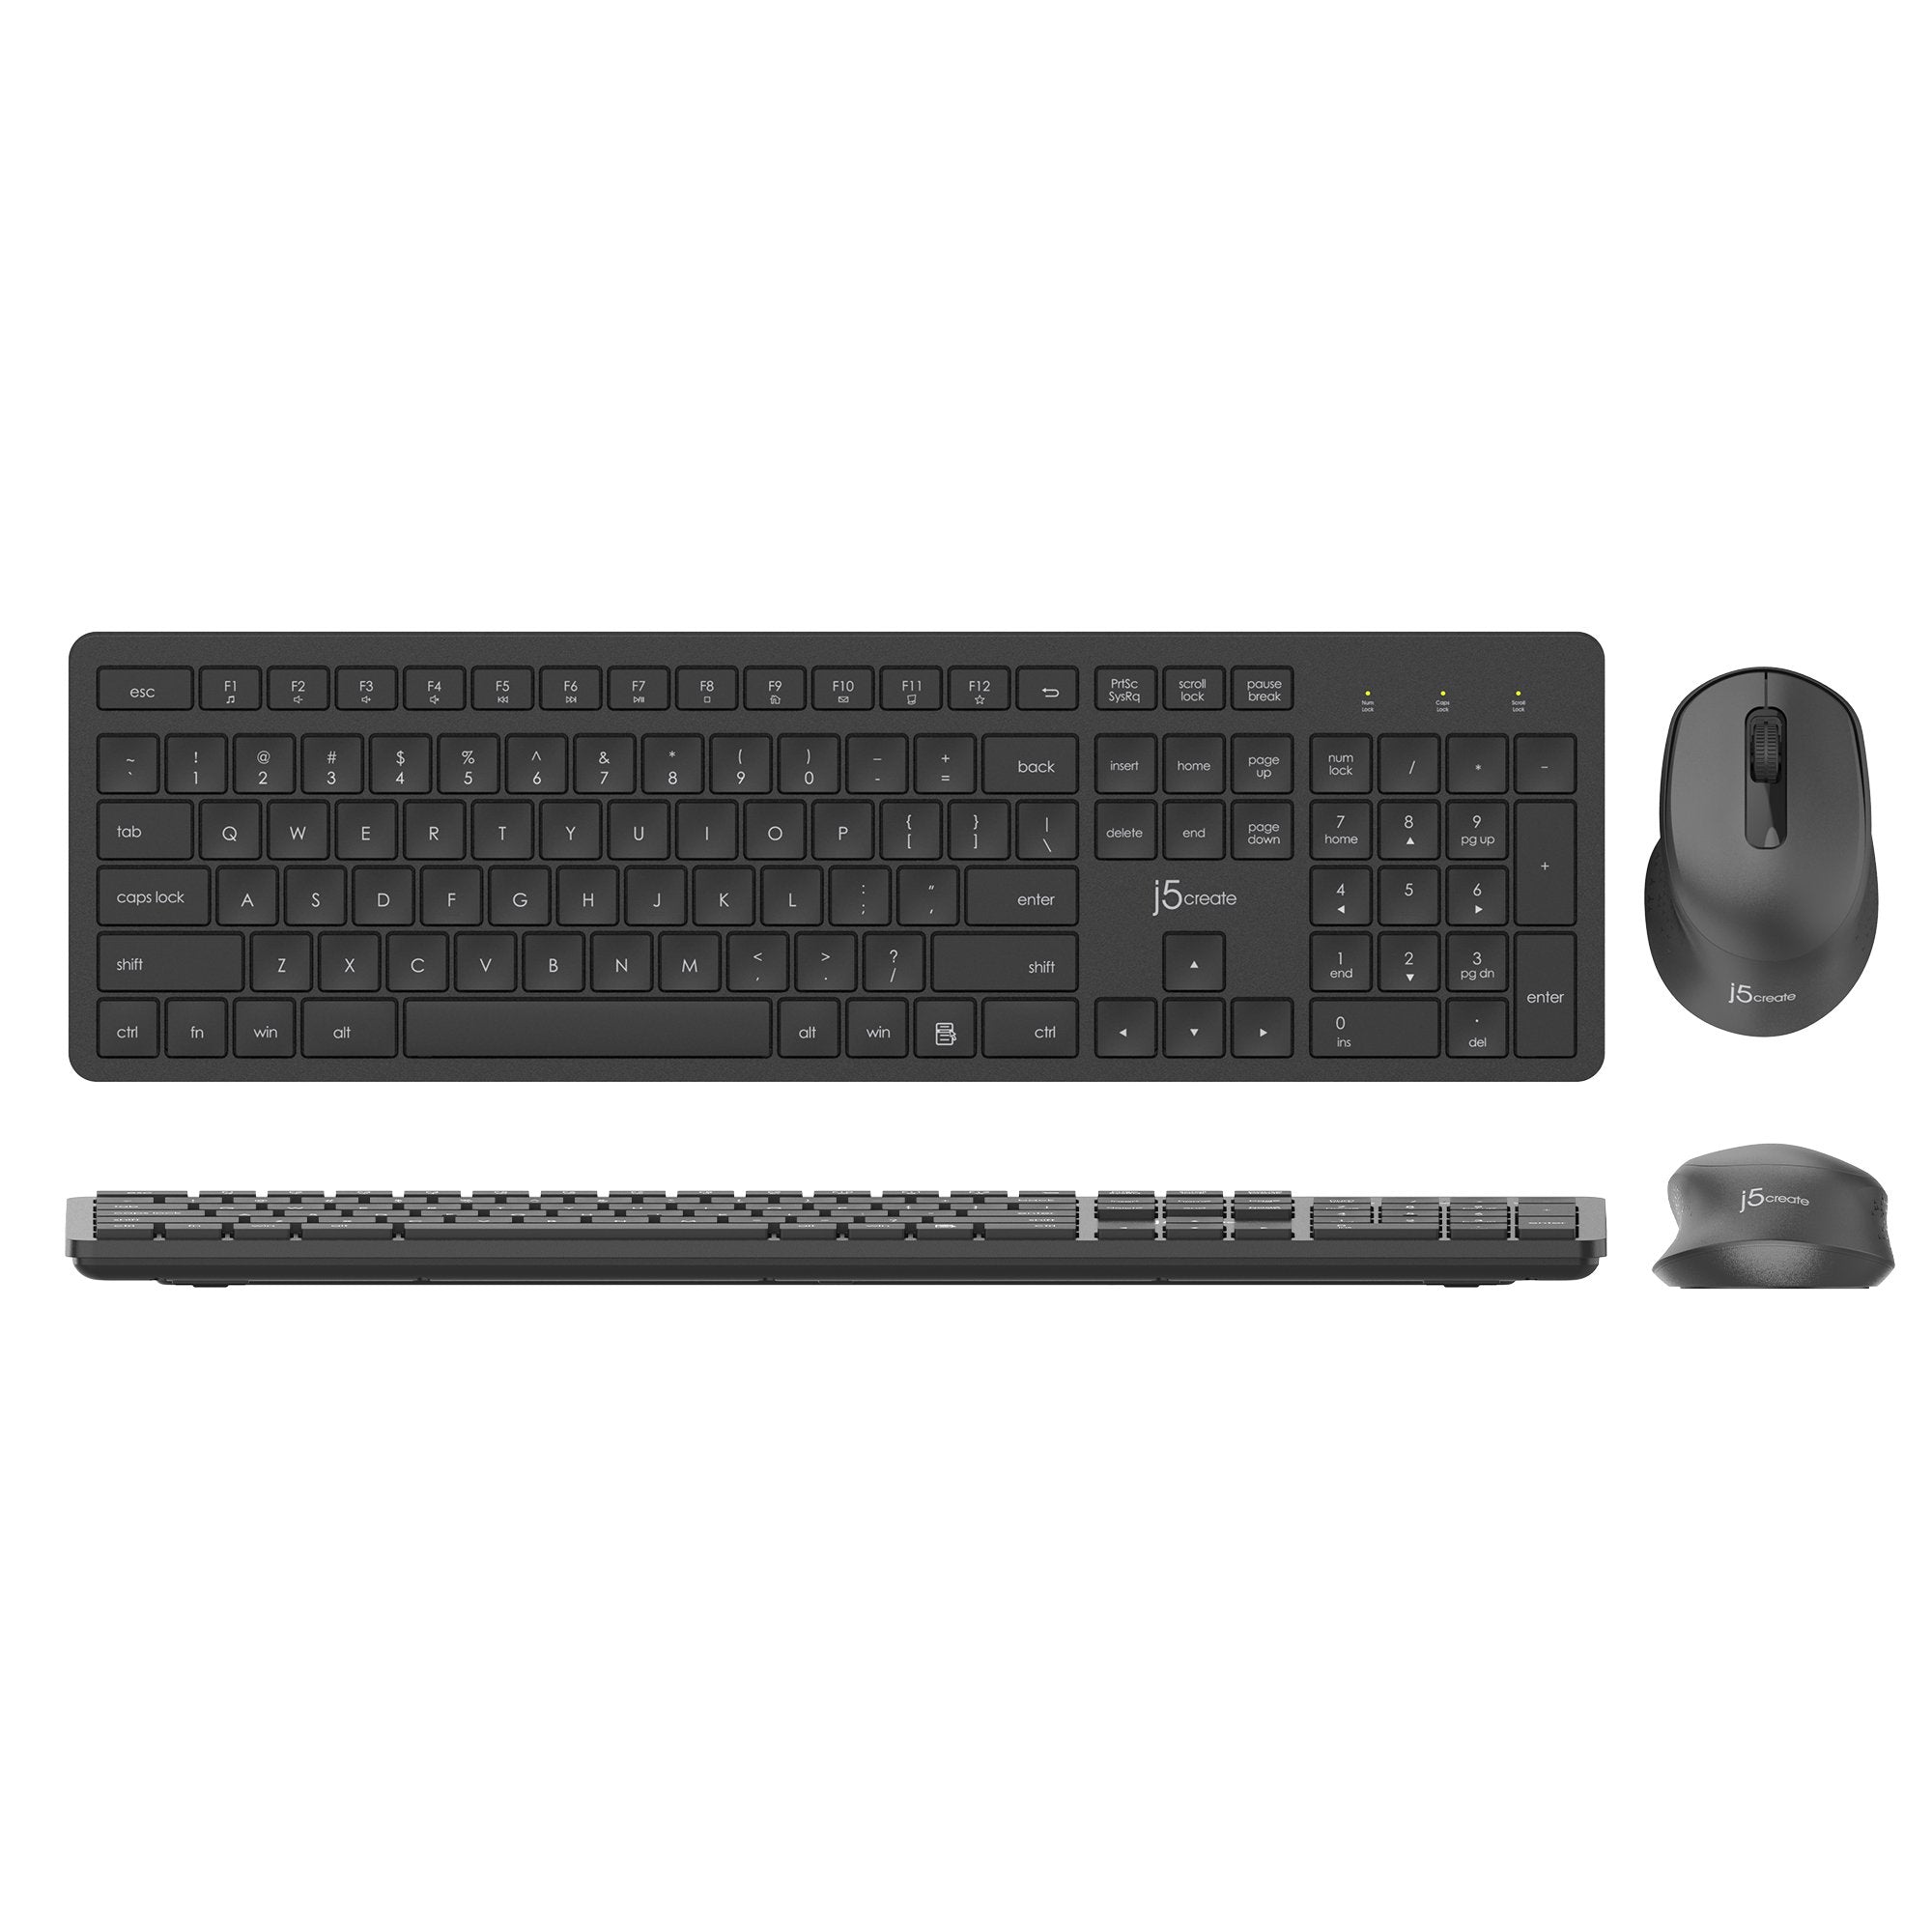 Simply Nuc Hid, Wireless Keyboard And Mouse (Black) 770-0031-000